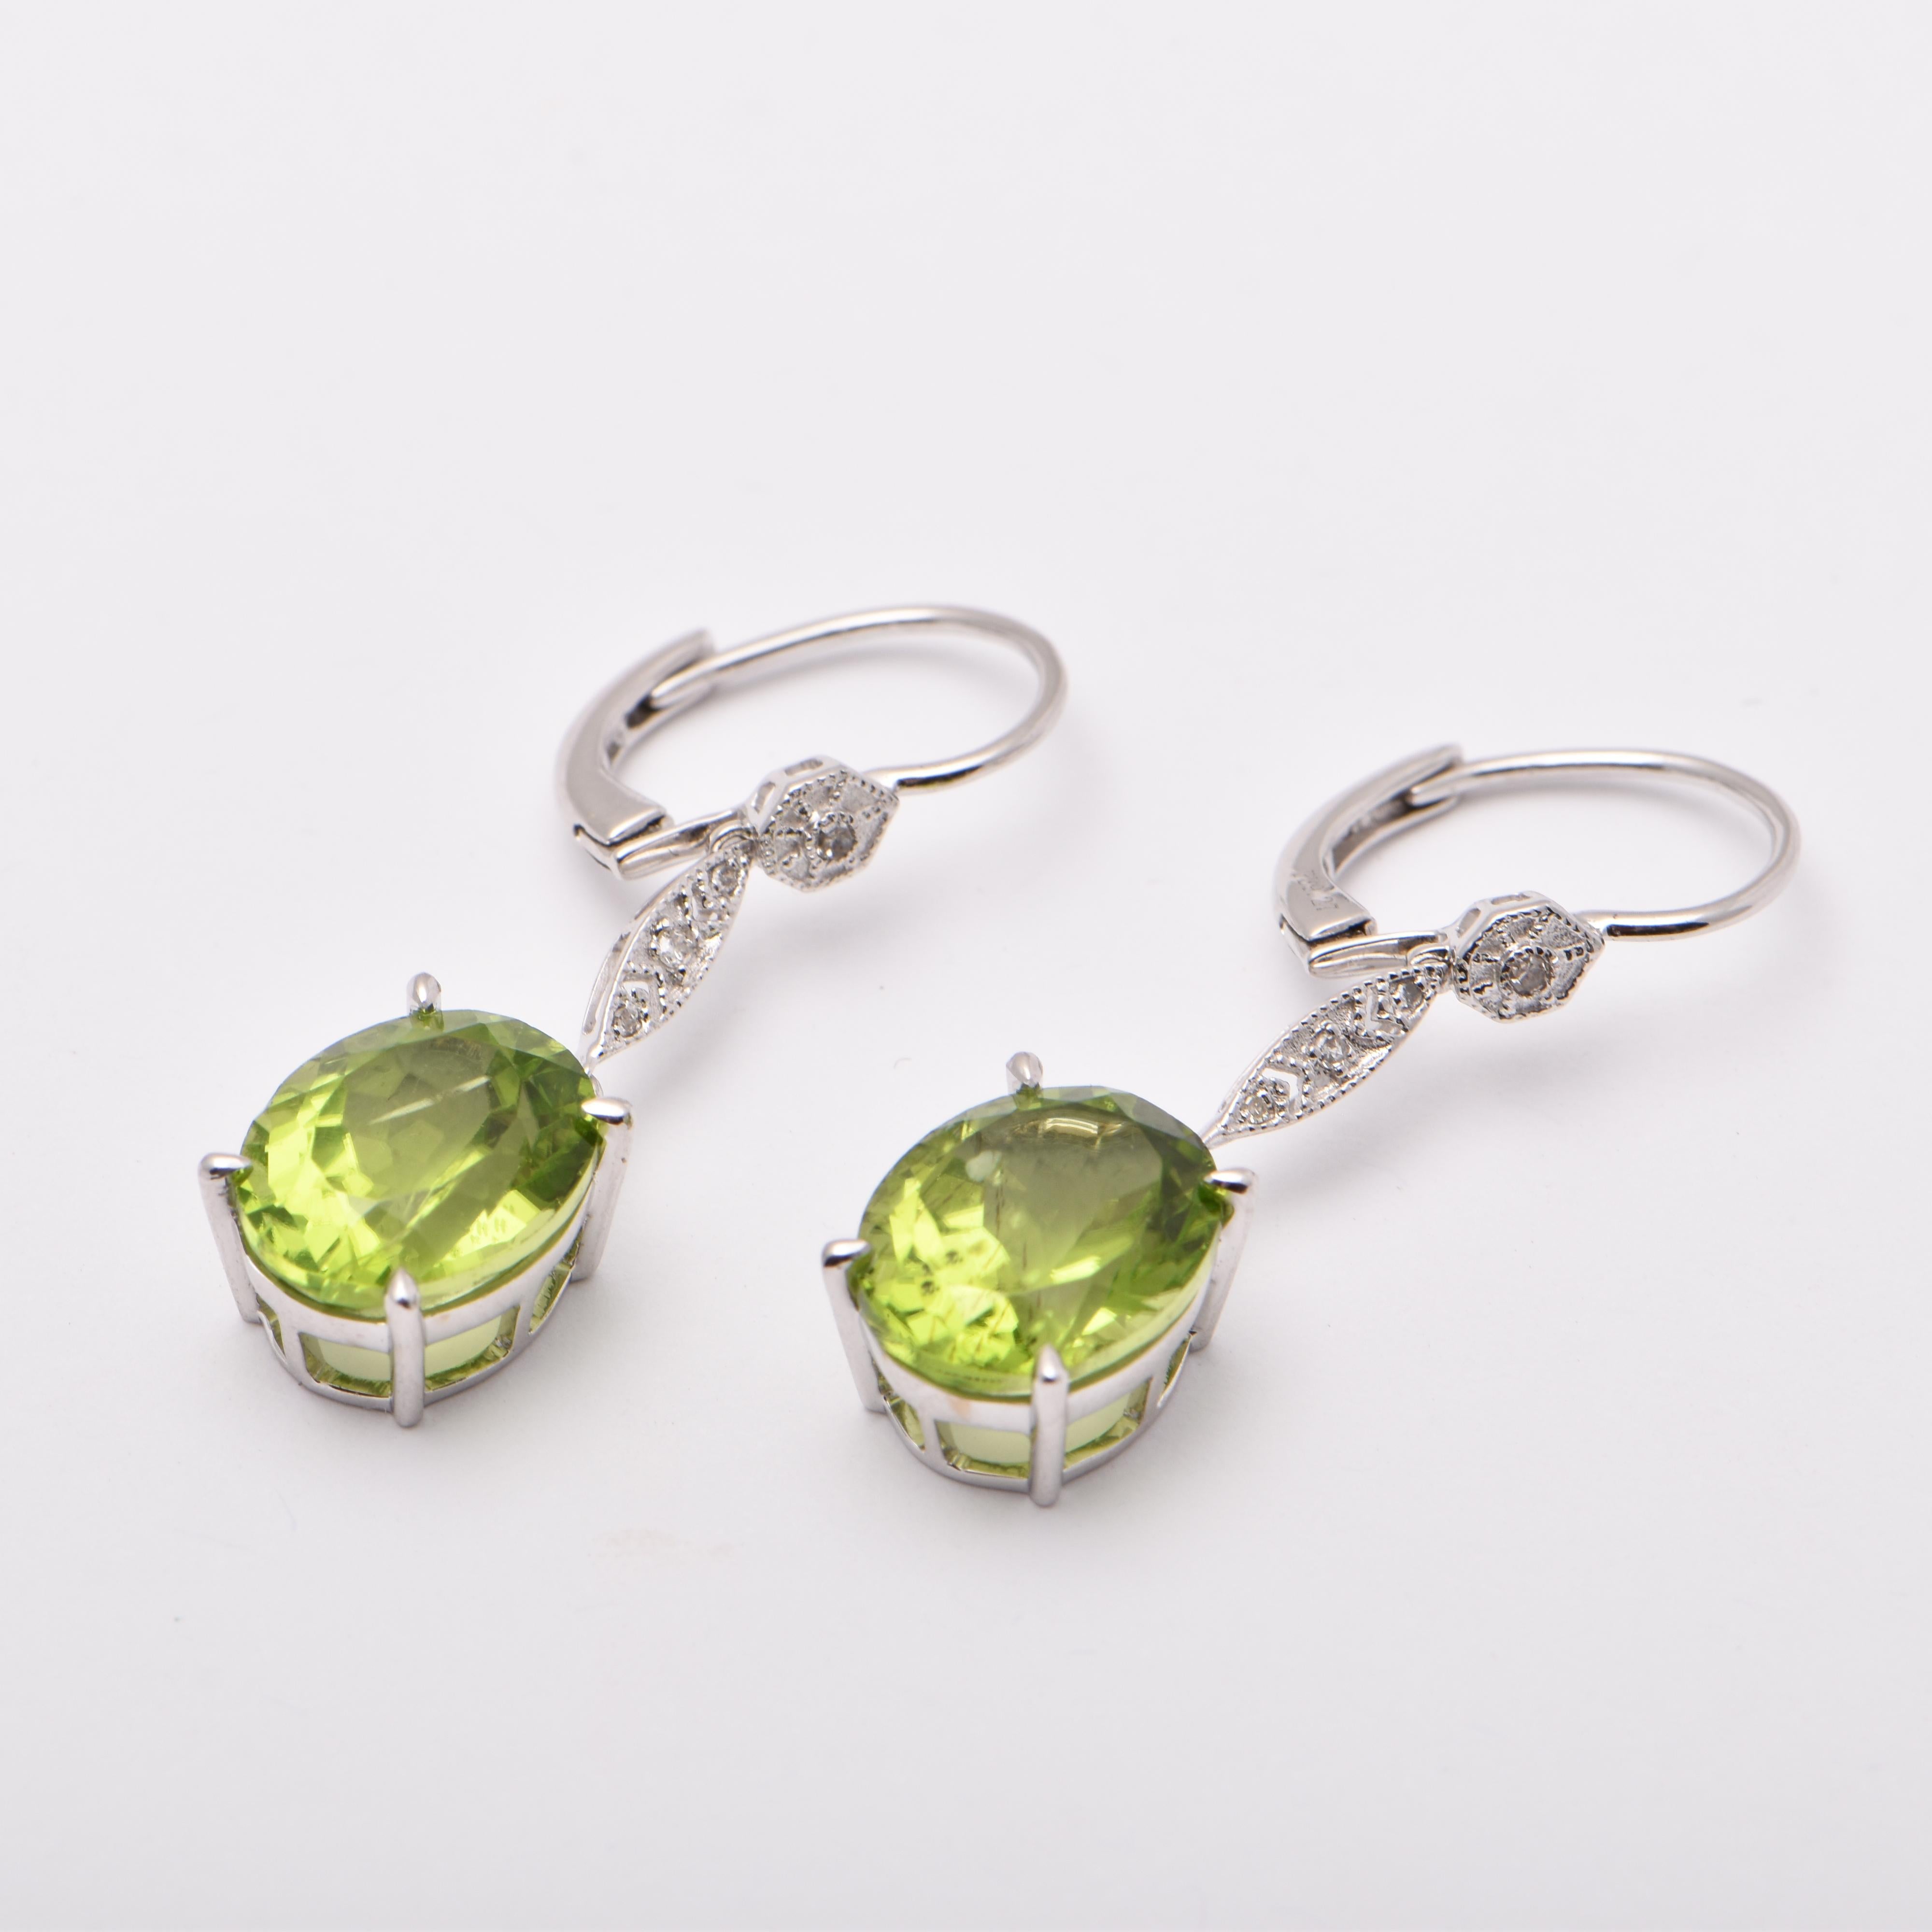 Oval Peridot and Diamond Drop Earrings in 18 Carat White Gold by Cartmer Jewellery  

2 Oval Peridots totalling 9.27 carats
8 Diamonds totalling 0.06 carats  

FREE express postage usually 3-4 days Sydney to New York 
FREE international insurance 